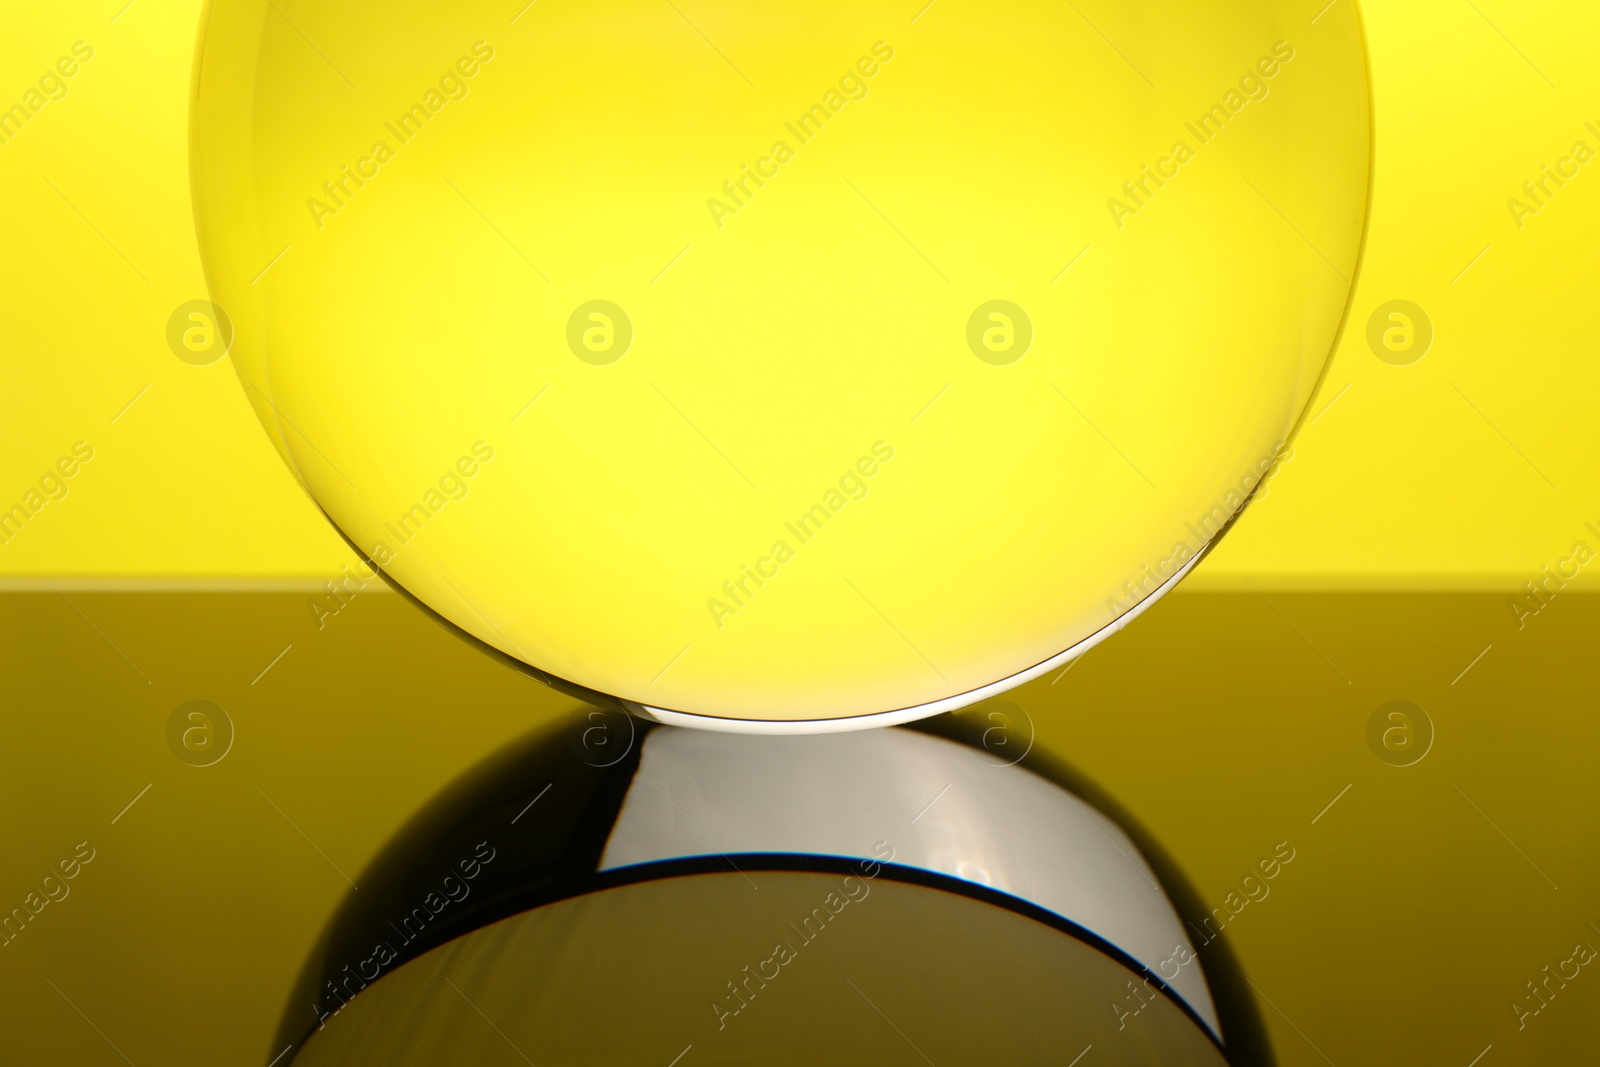 Photo of Transparent glass ball on mirror surface against yellow background, closeup